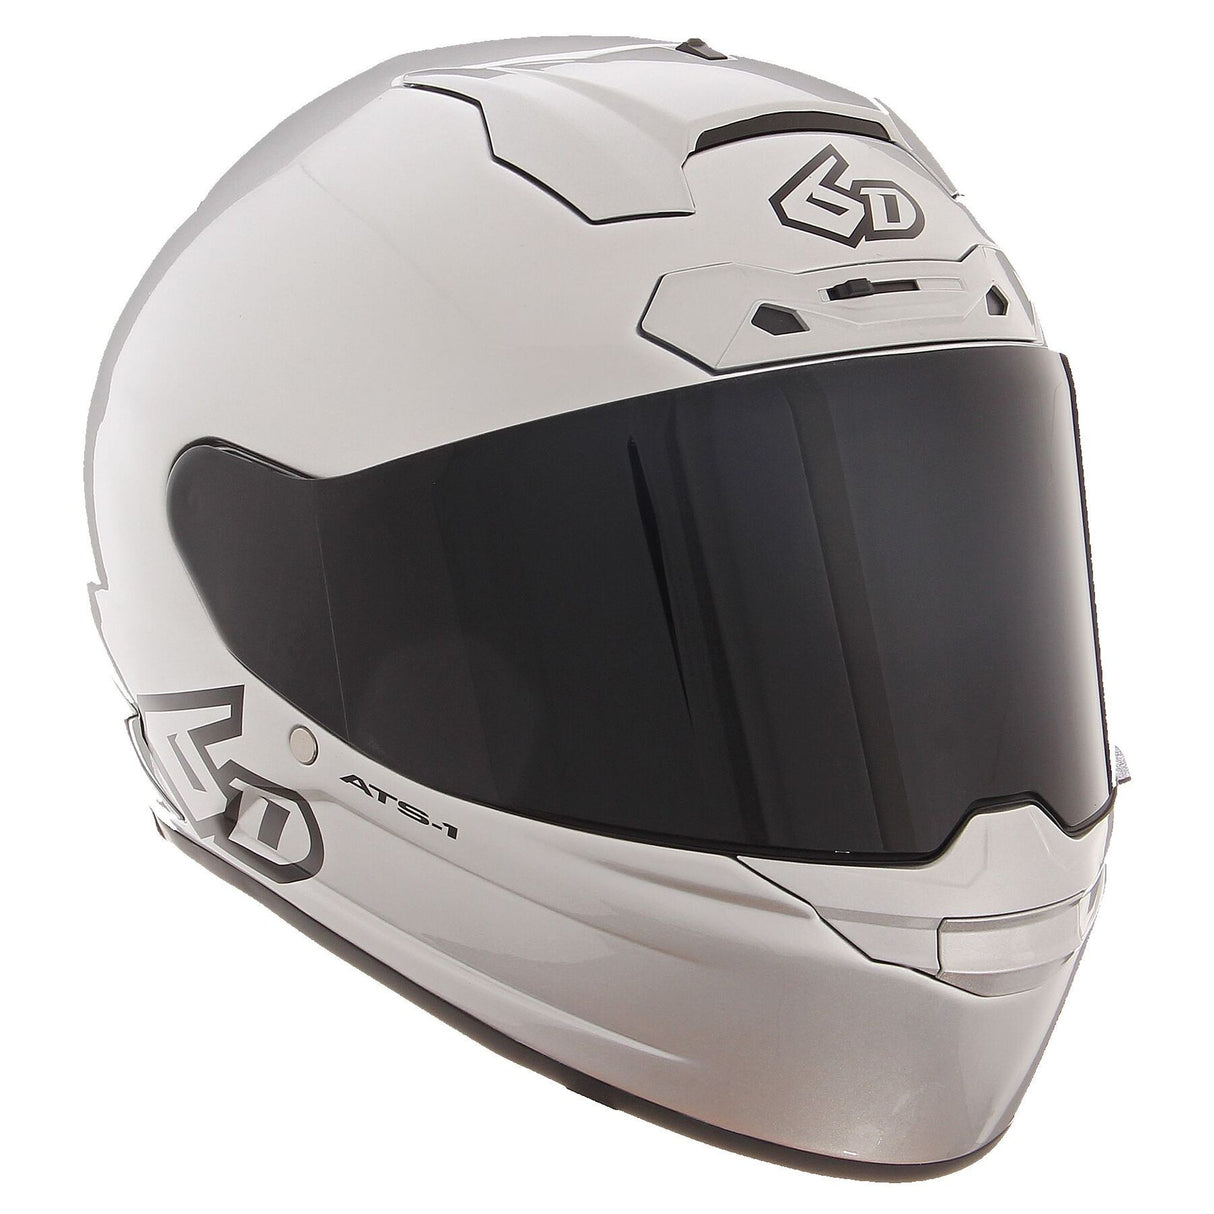 6D ATS-1R Motorcycle Helmet - Solid Gloss Silver